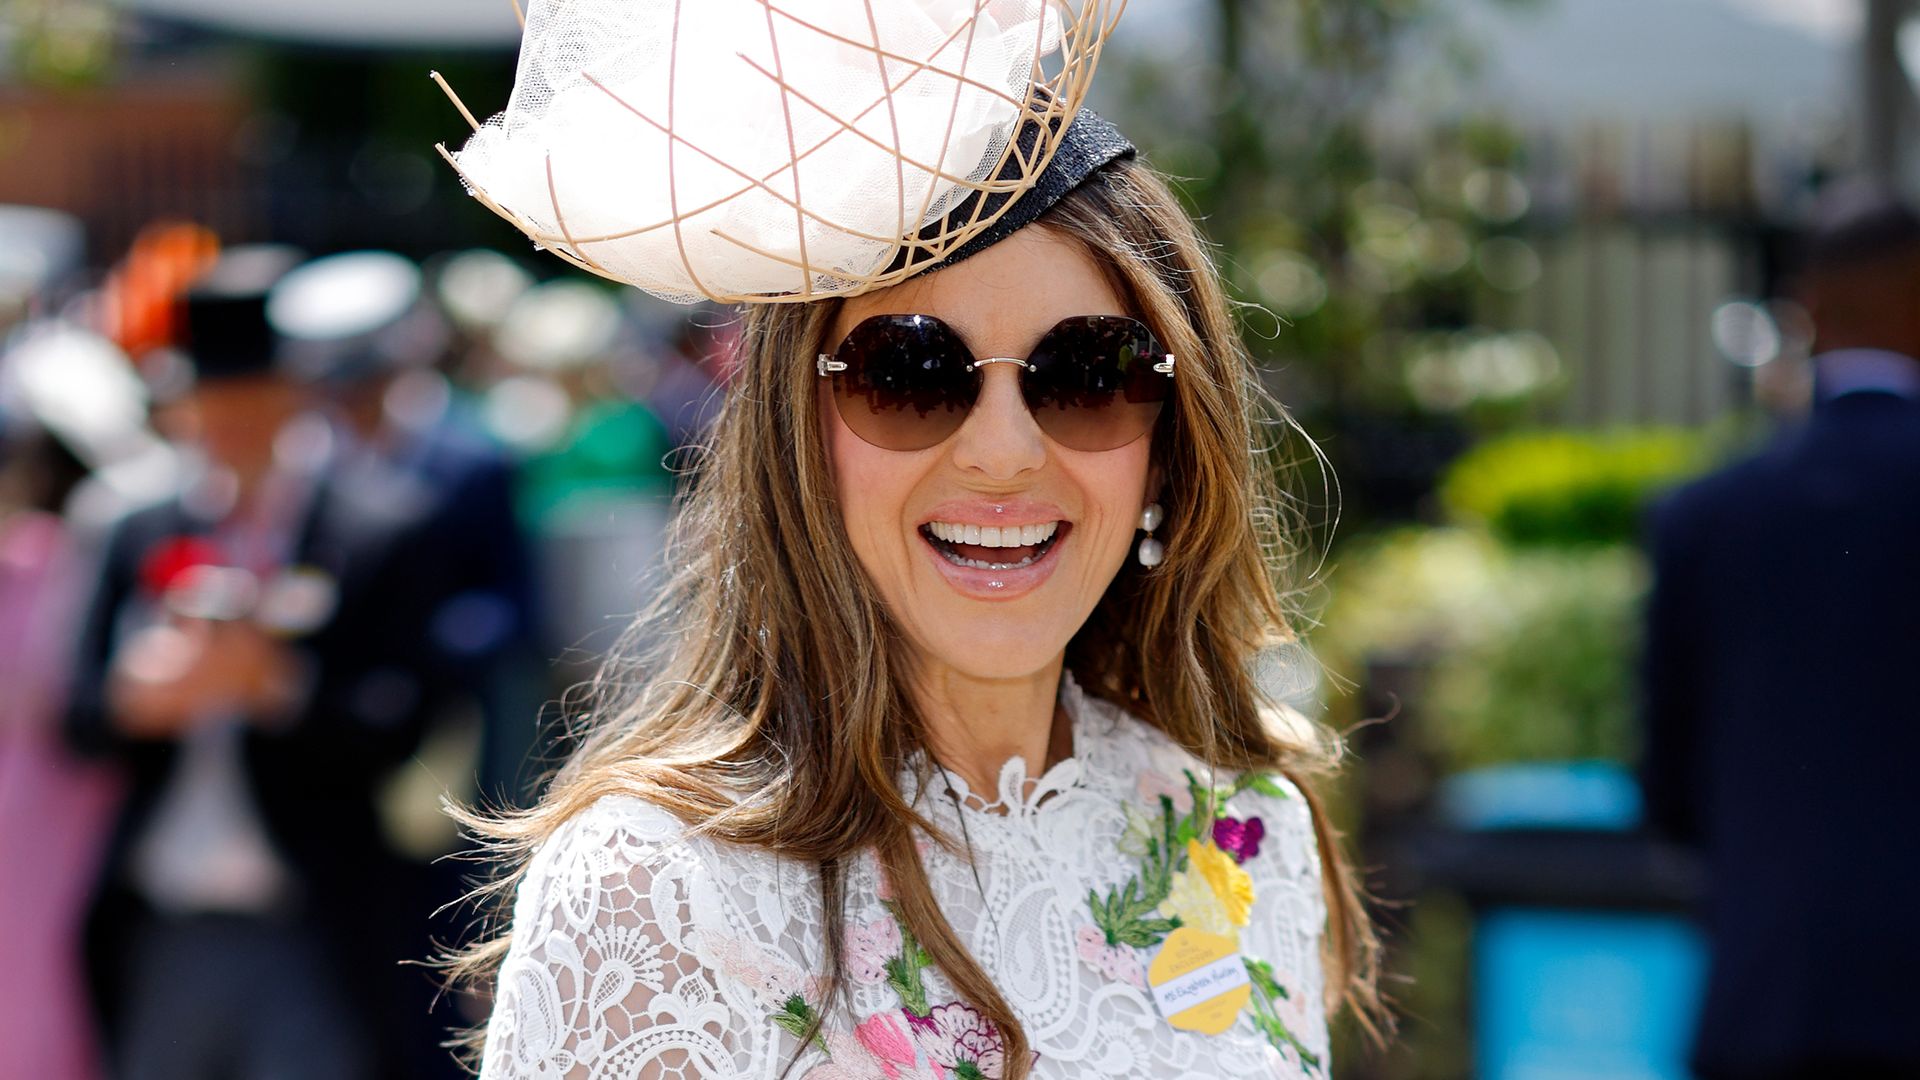 Elizabeth Hurley steps out in figure-hugging lace dress and daring fascinator for exciting day out